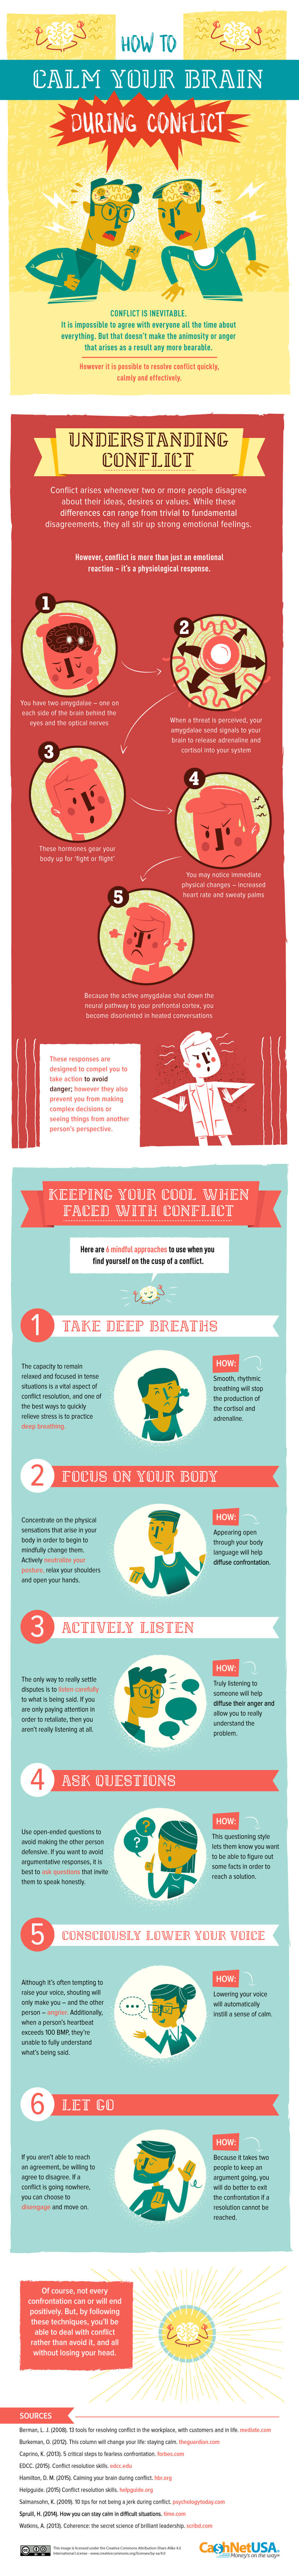 calm your brain infographic